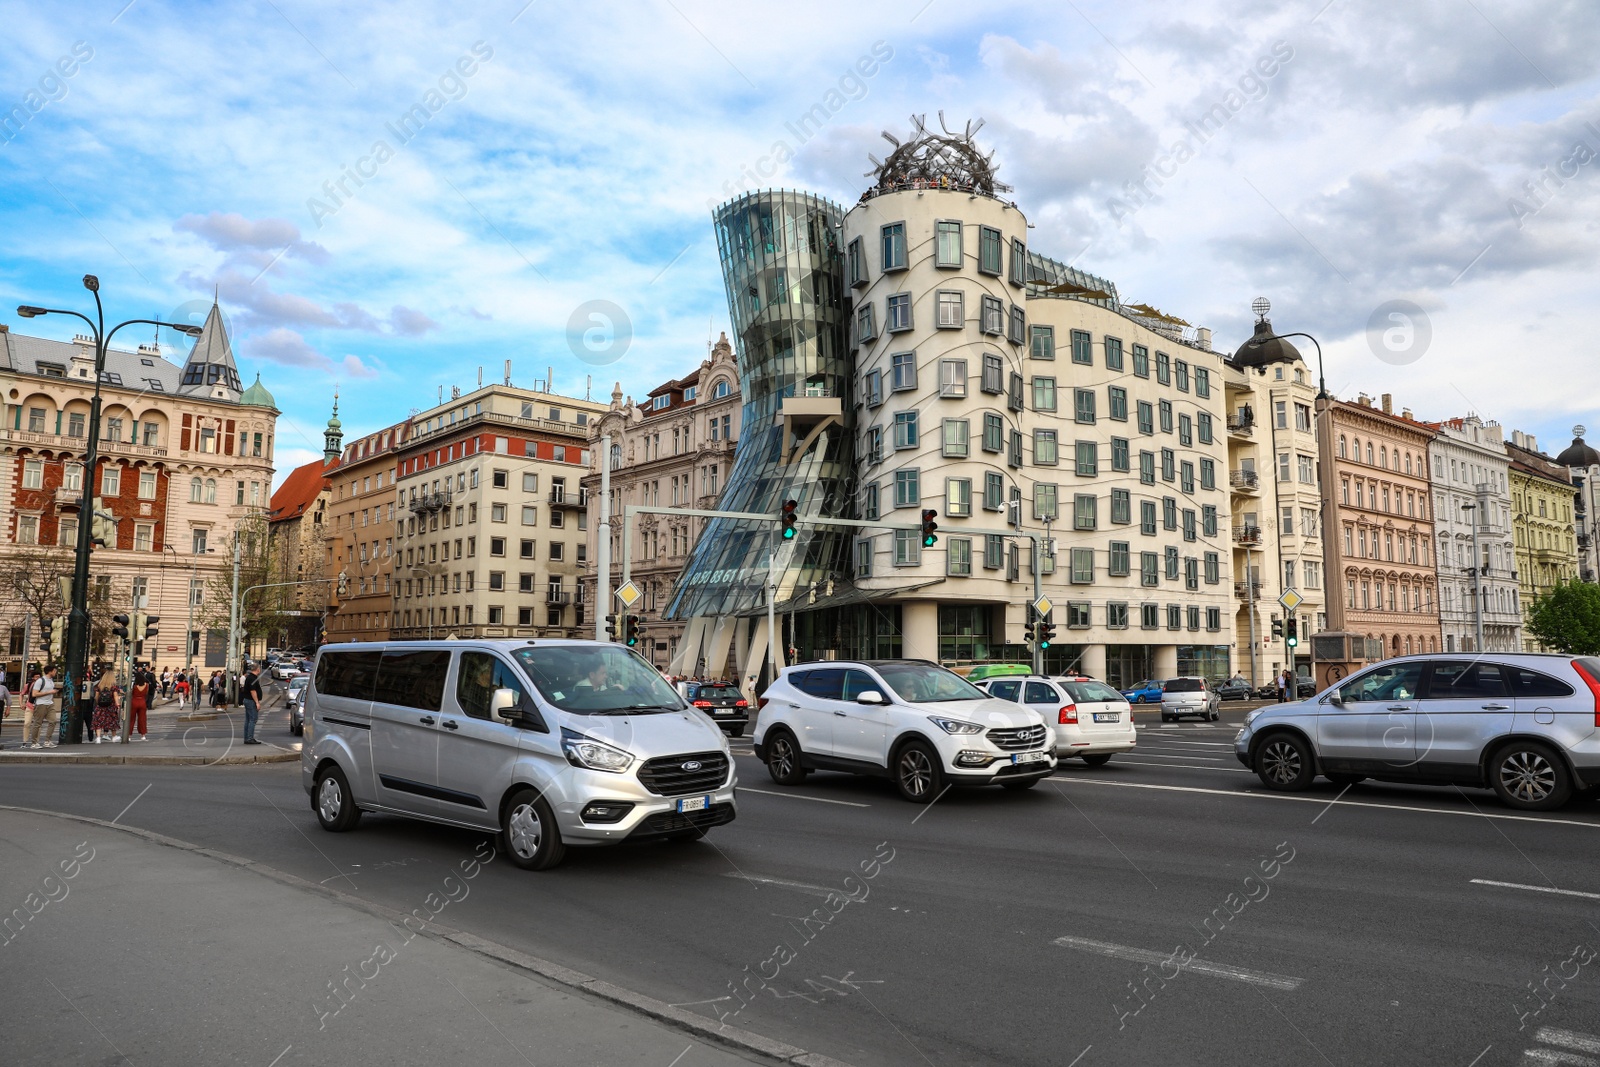 Photo of PRAGUE, CZECH REPUBLIC - APRIL 25, 2019: View of city street with road traffic near Dancing House